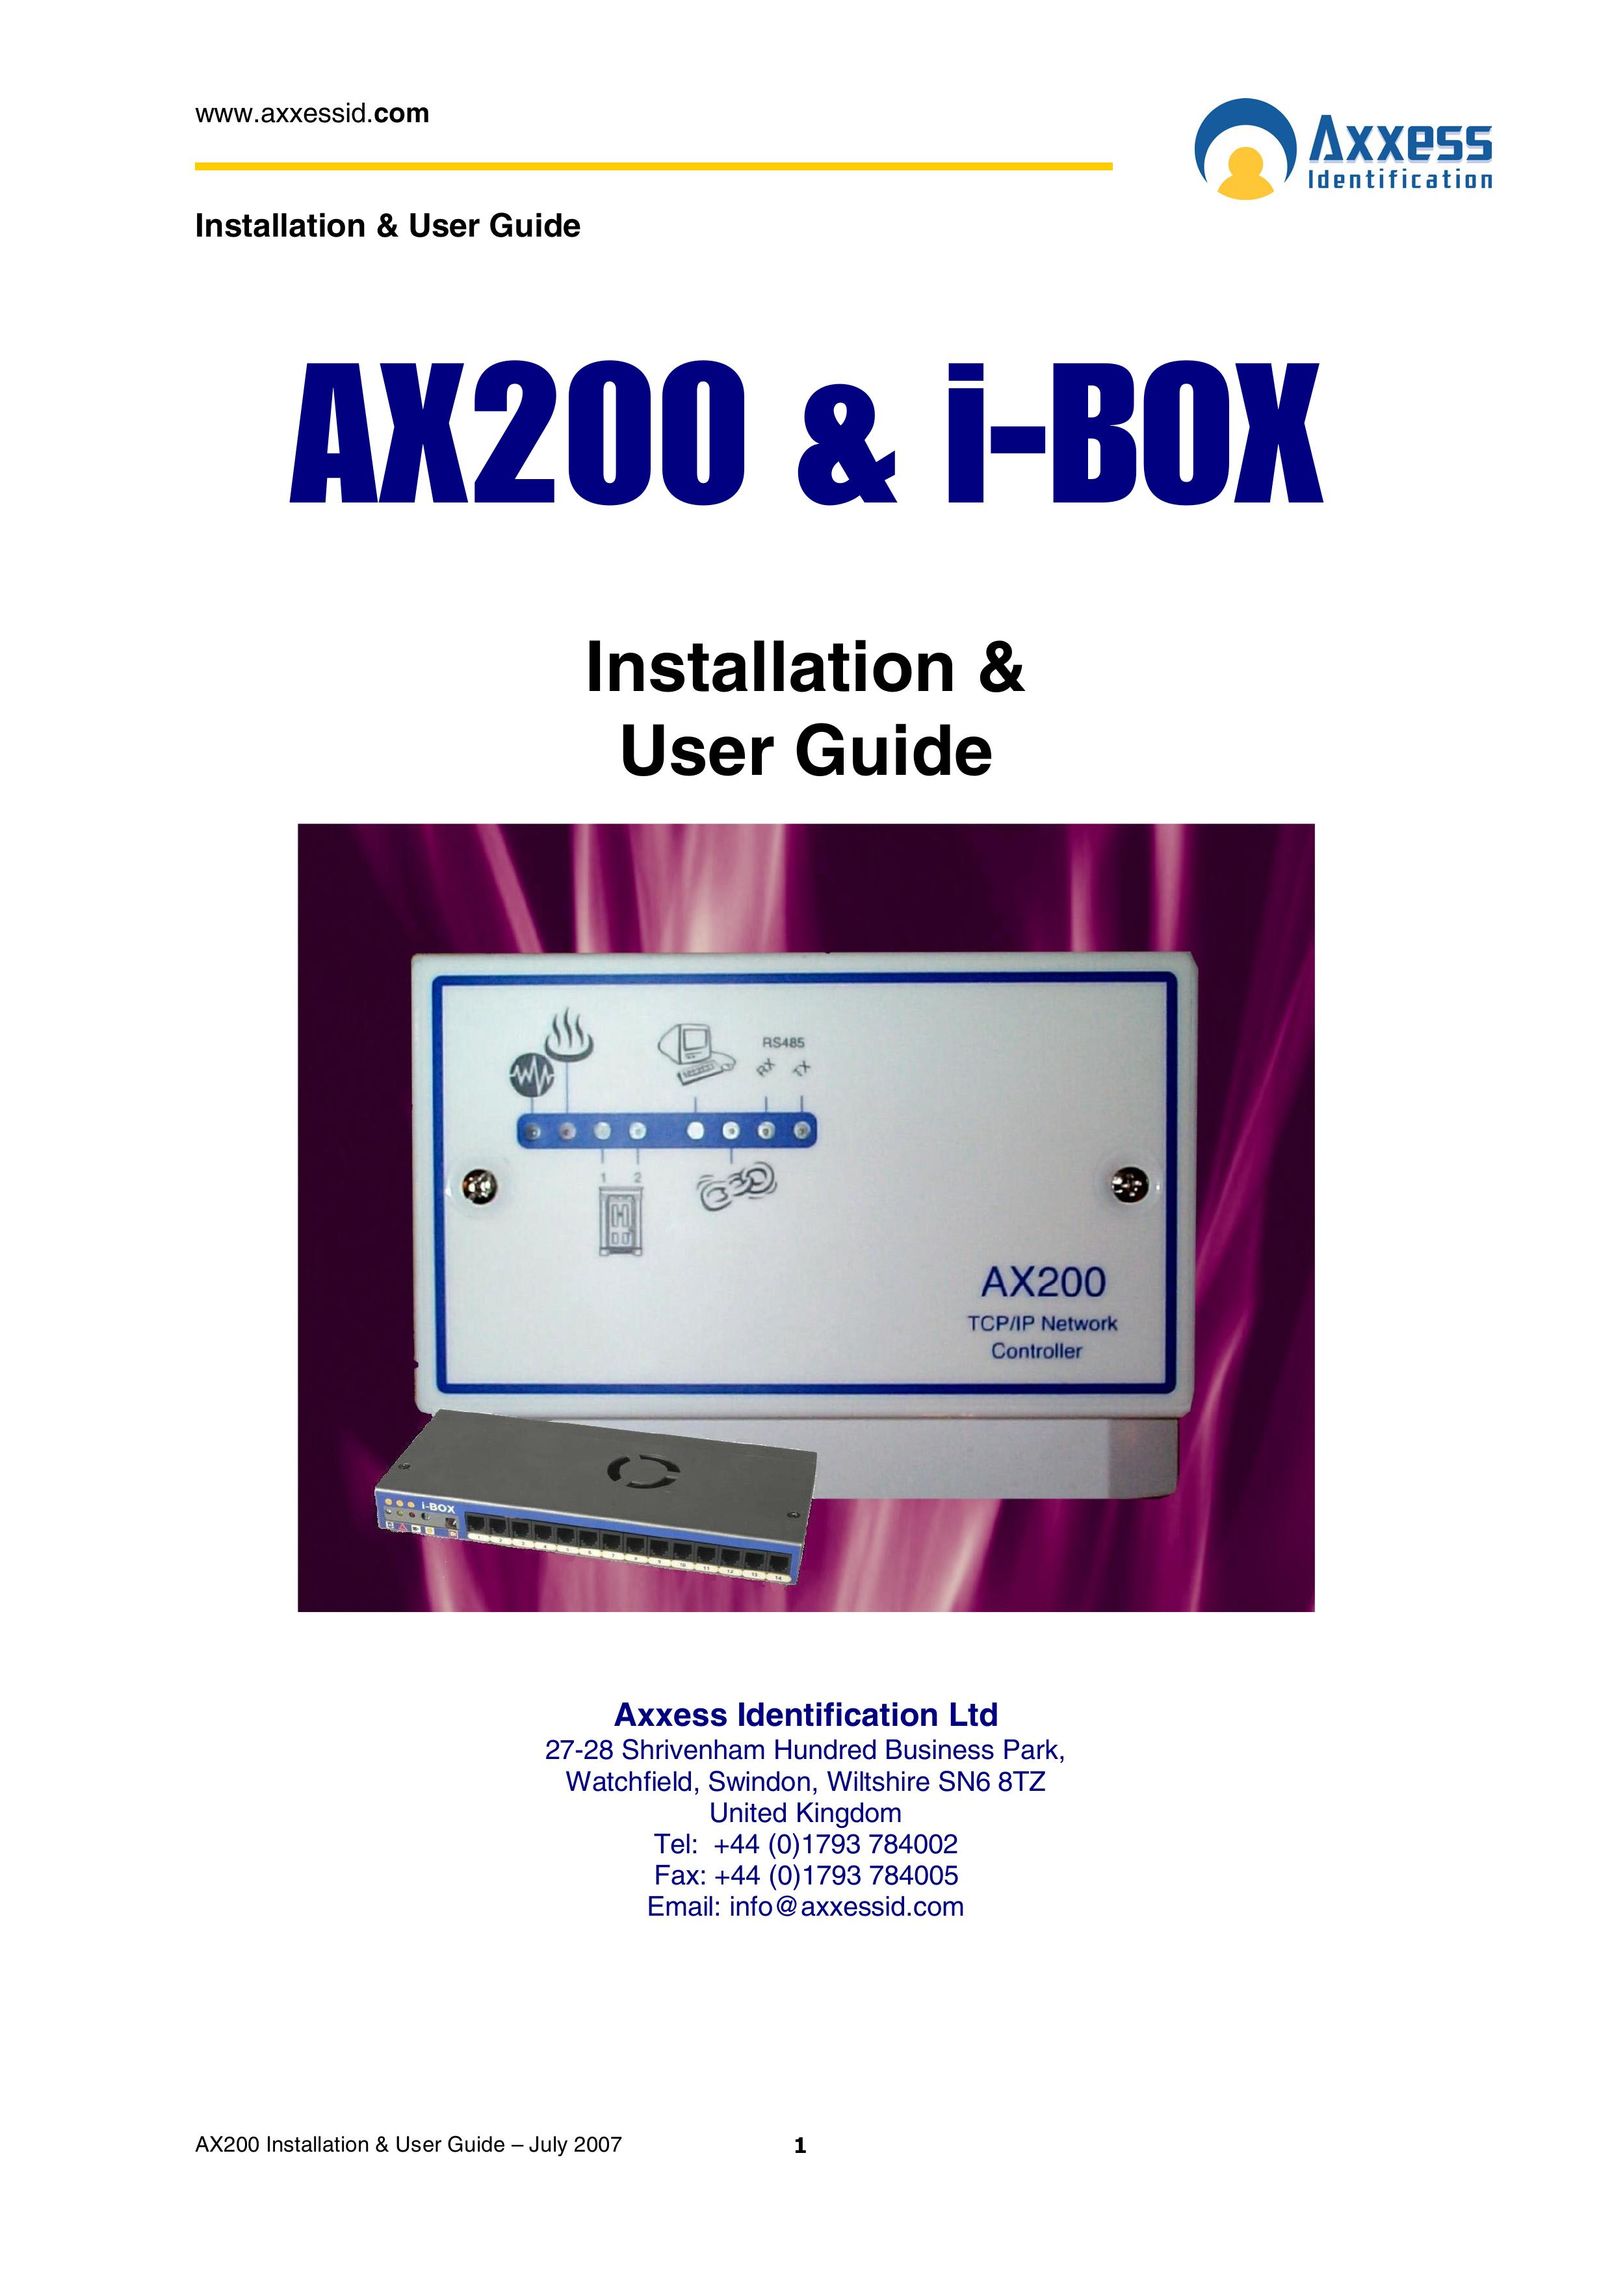 Casio AX200 Network Router User Manual